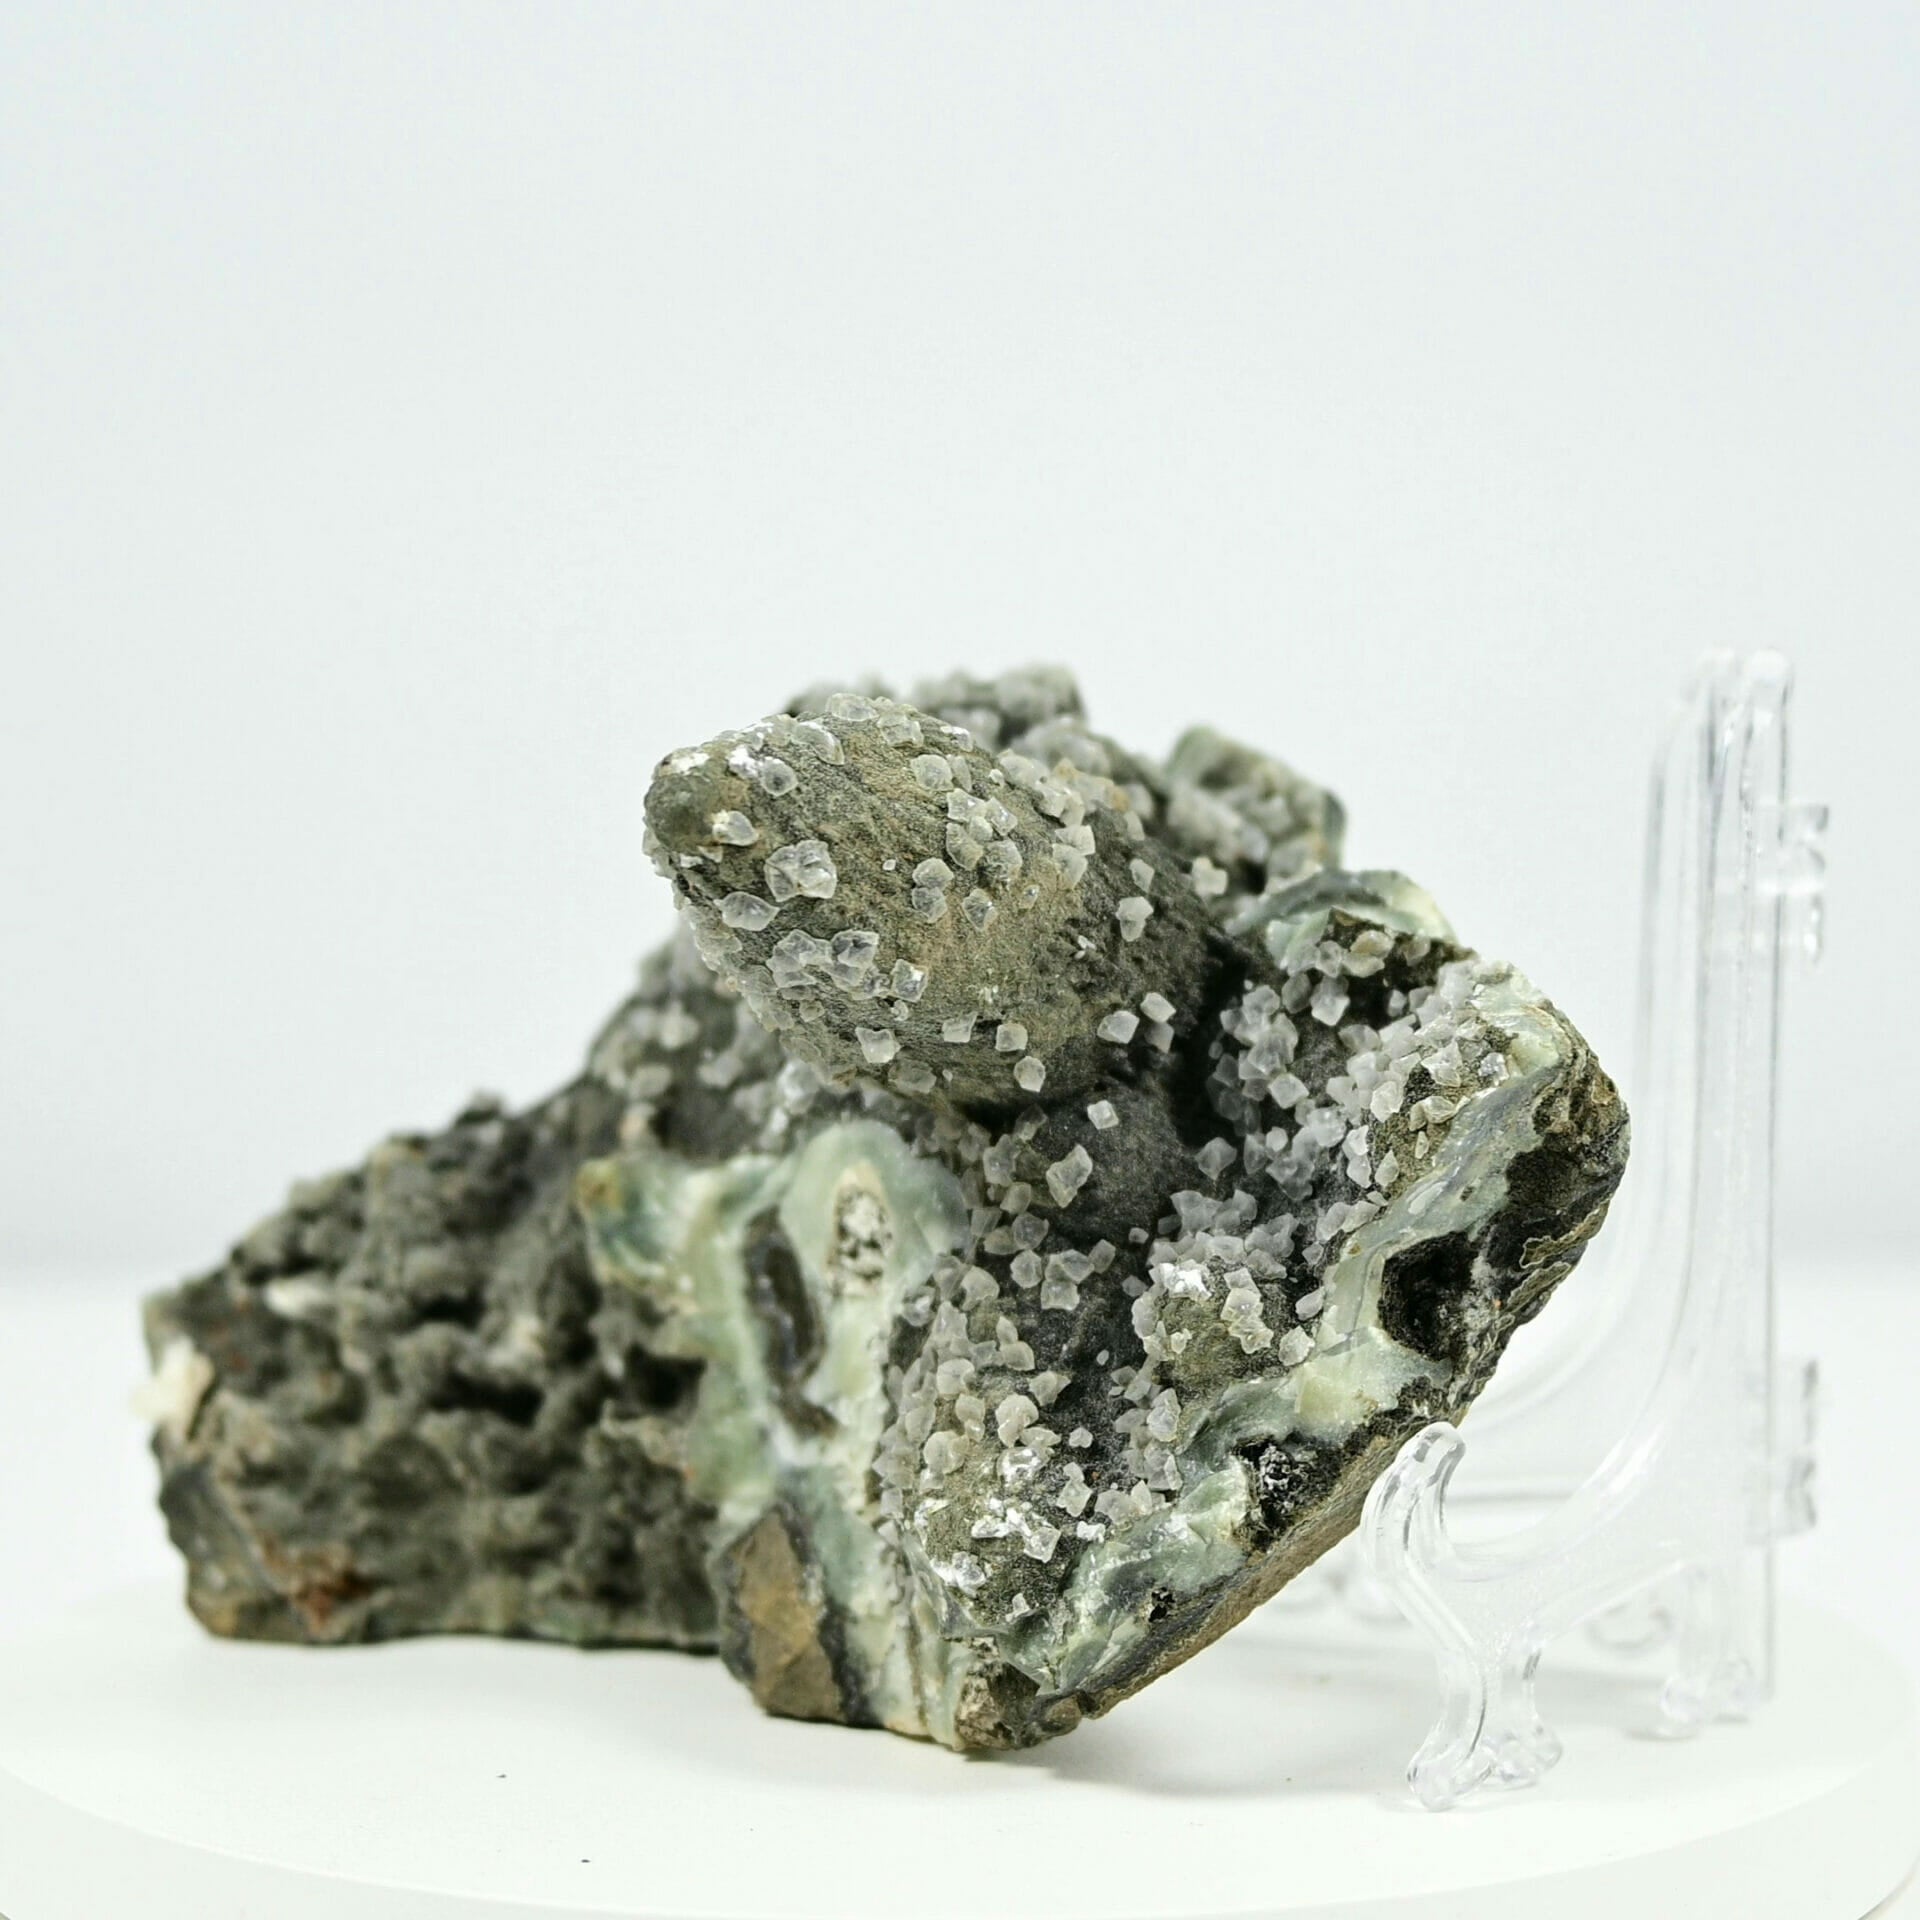 Rare find dark forest with many trees and many square calcite covered inclusion side 2